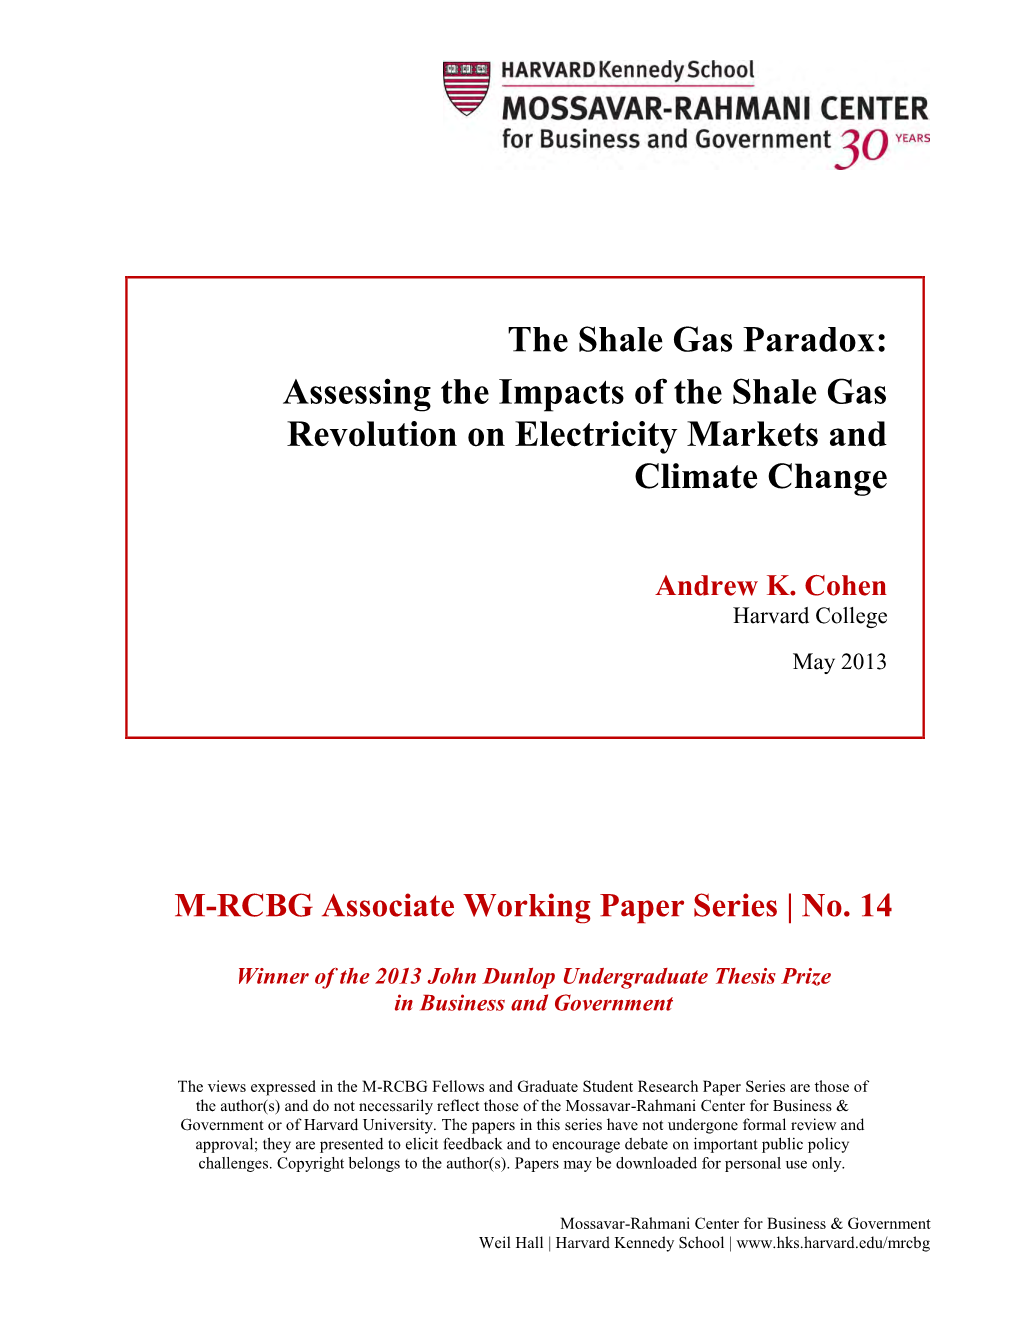 Assessing the Impacts of the Shale Gas Revolution on Electricity Markets and Climate Change